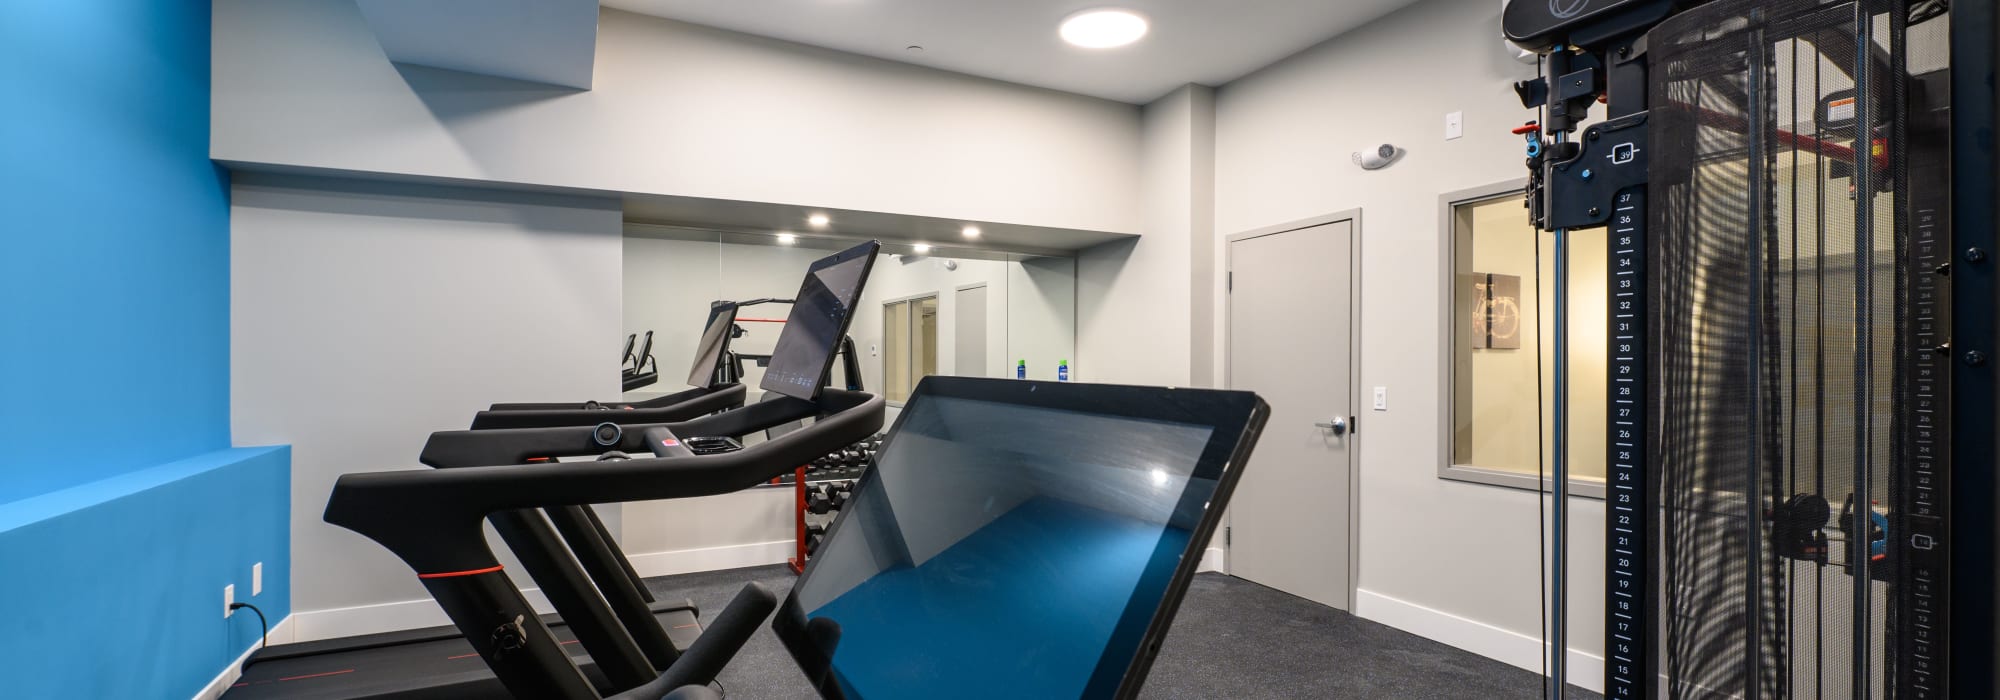 Fitness Center at Apartments in Cheshire, Connecticut